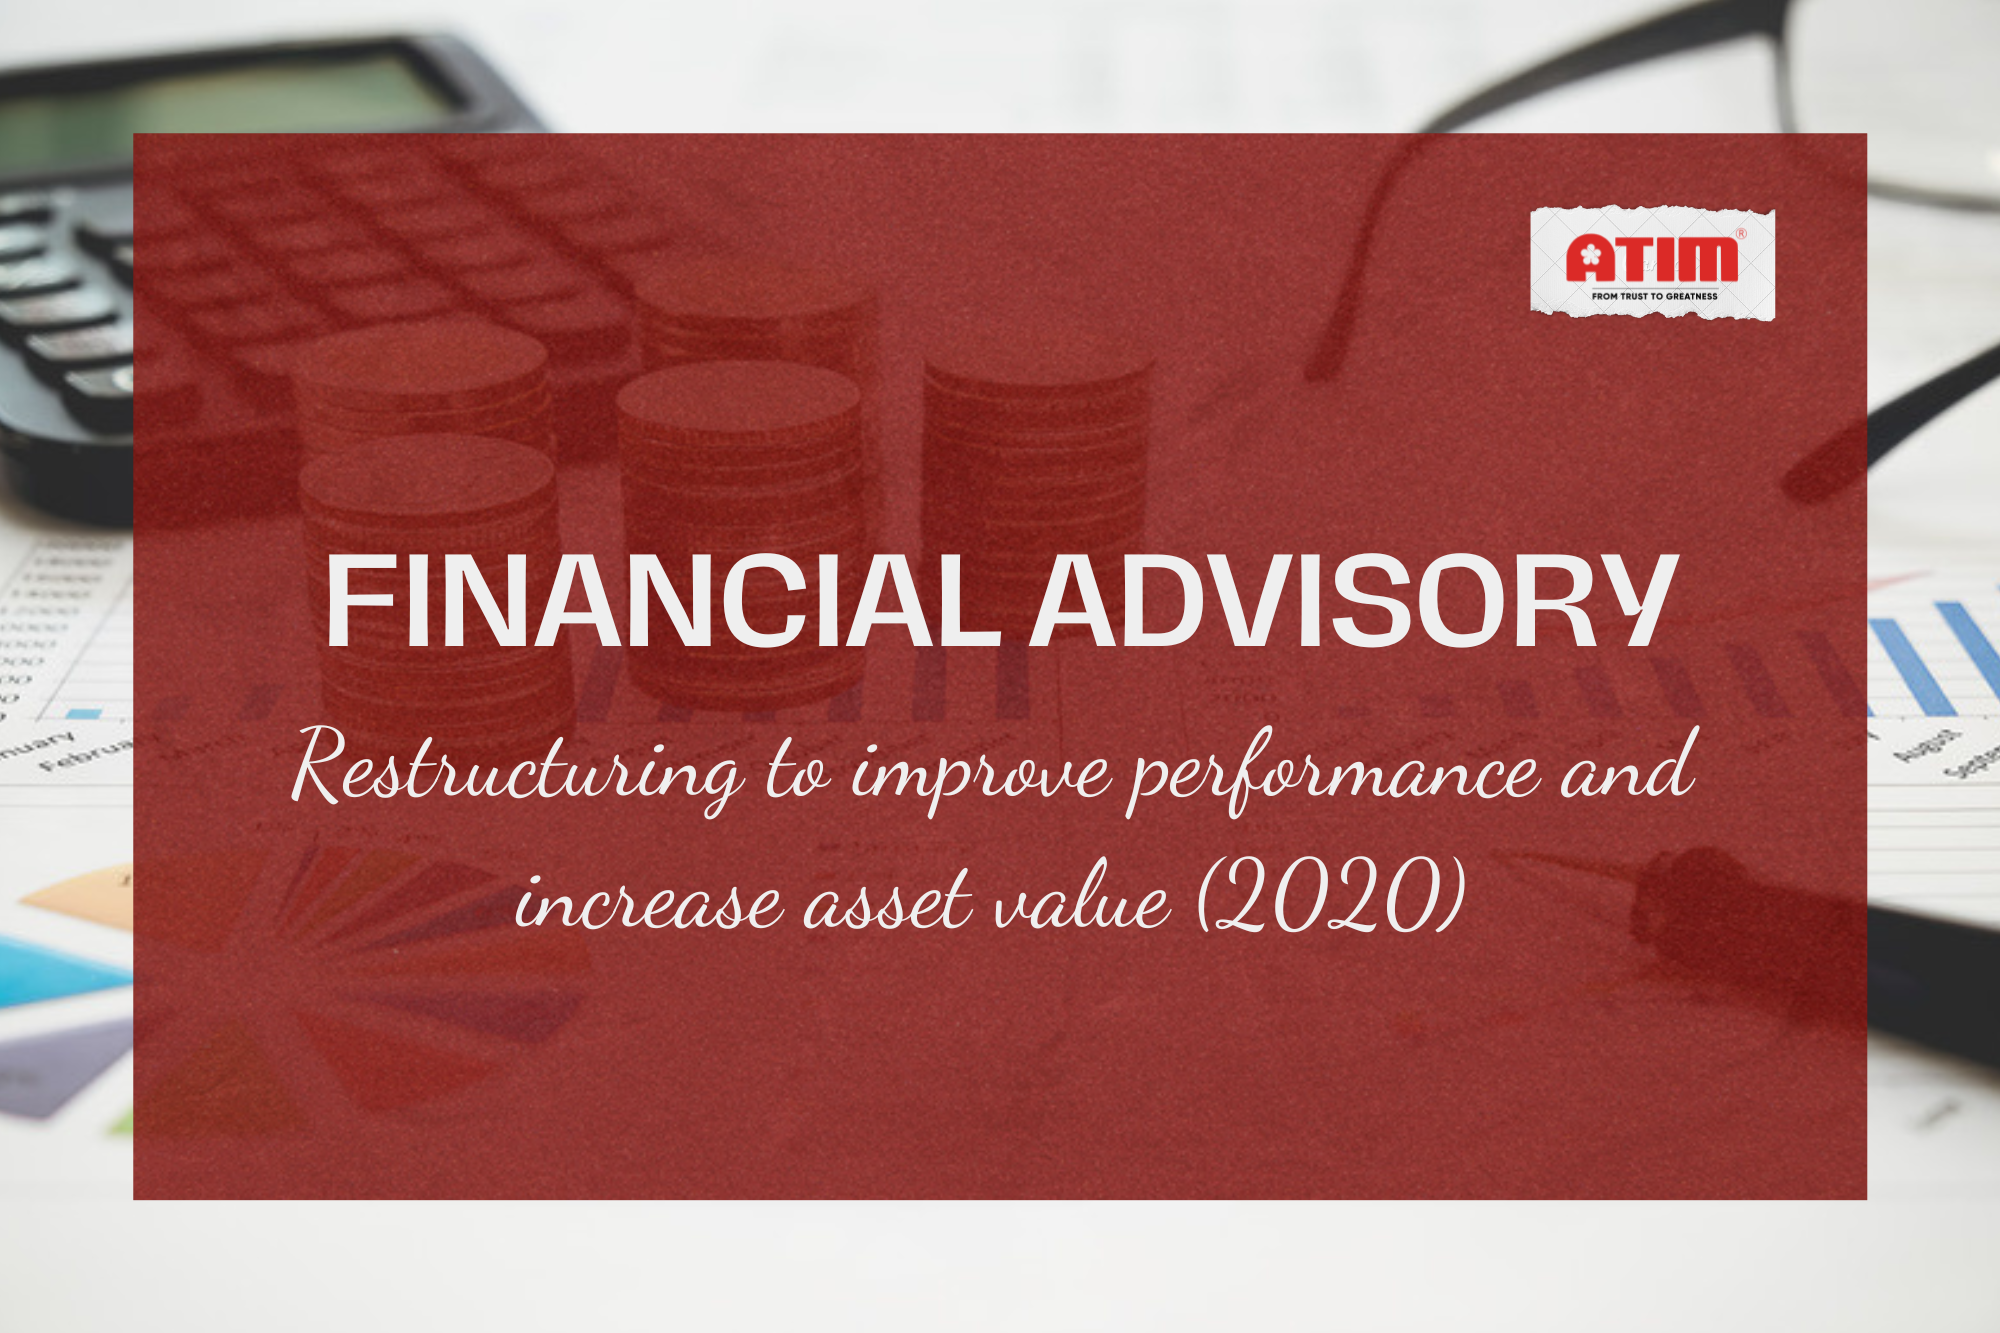 Financial Advisory - Restructuring to improve performance and increase asset value